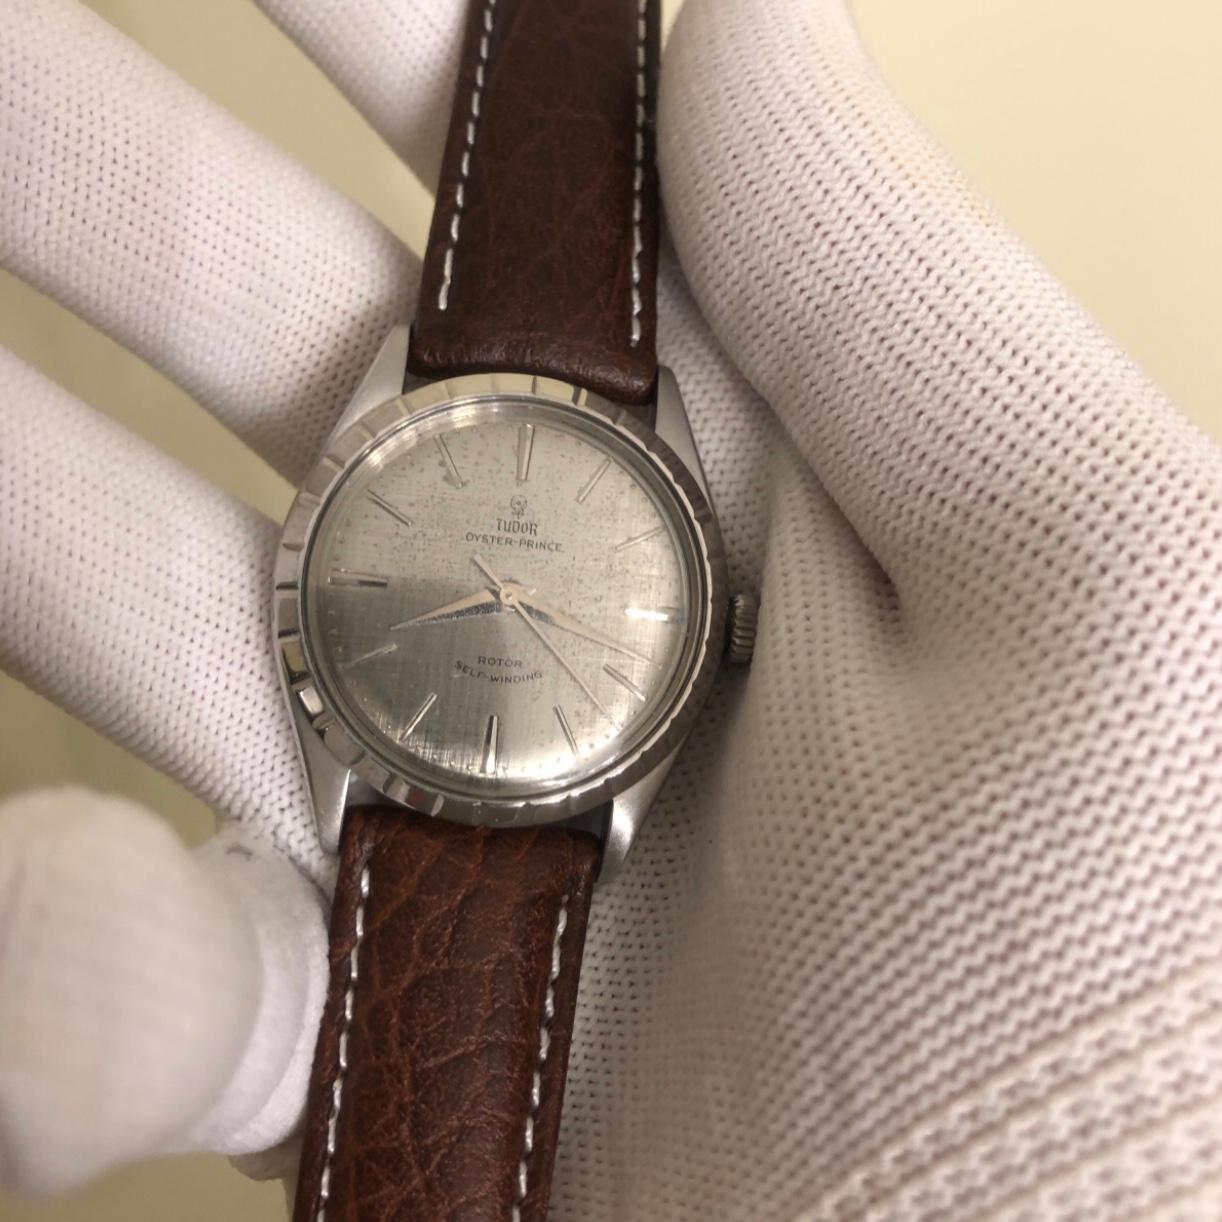 Rolex Tudor Oyster Prince 7965 Rolex 34mm Leather Men's Watch In Good Condition For Sale In New York, NY